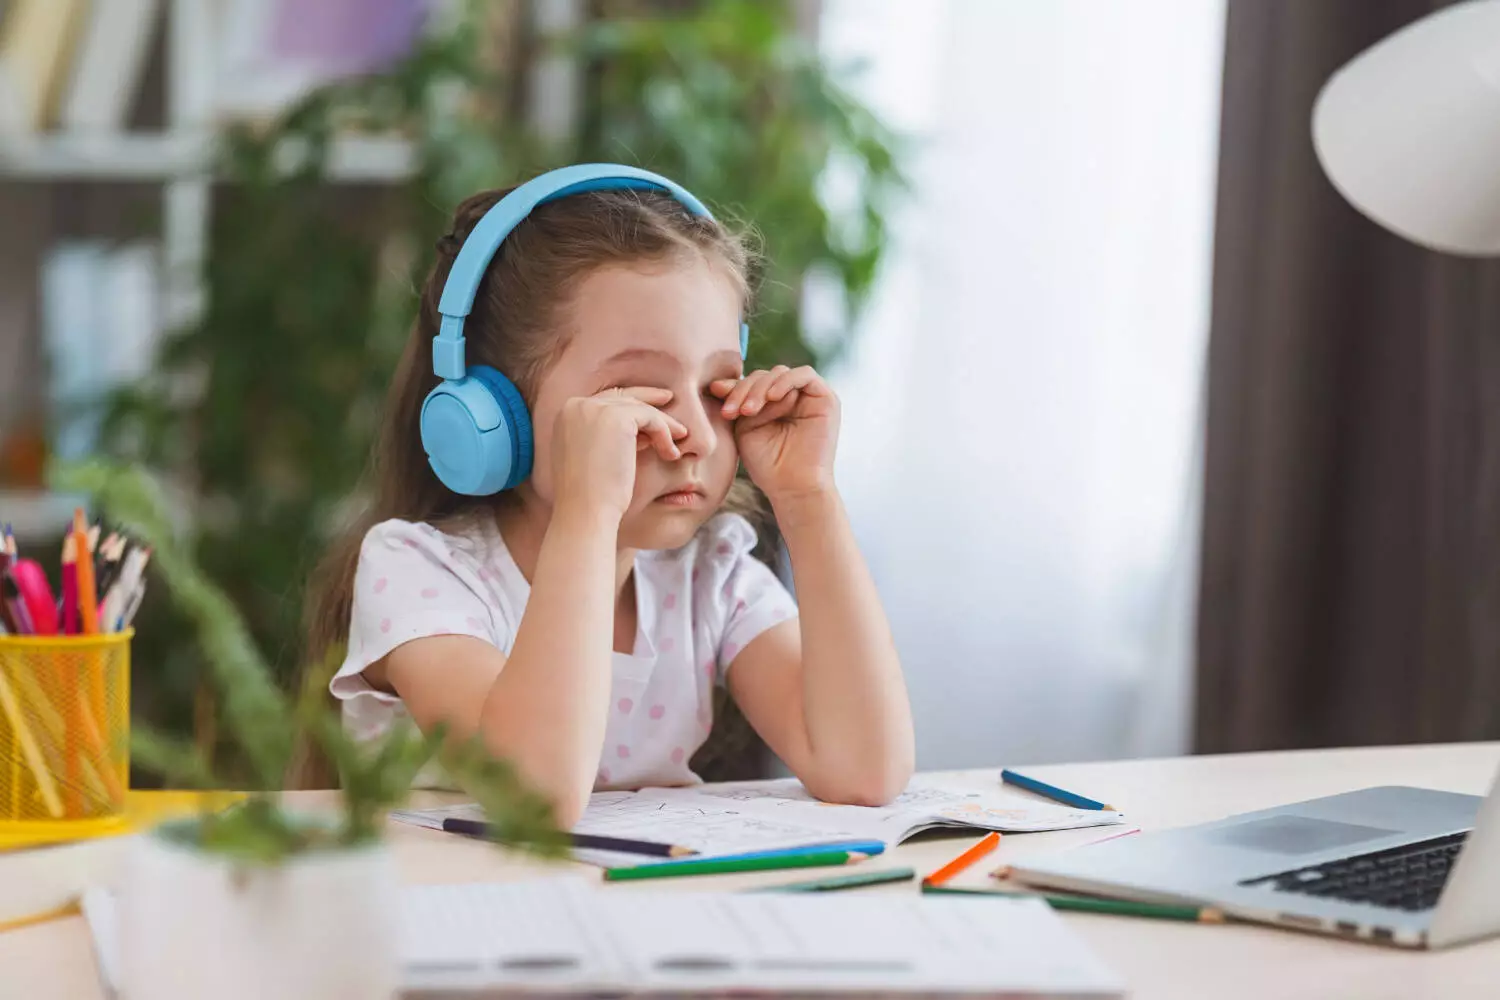 Frequent use of laptops and smartphones puts strain on kids' eyes